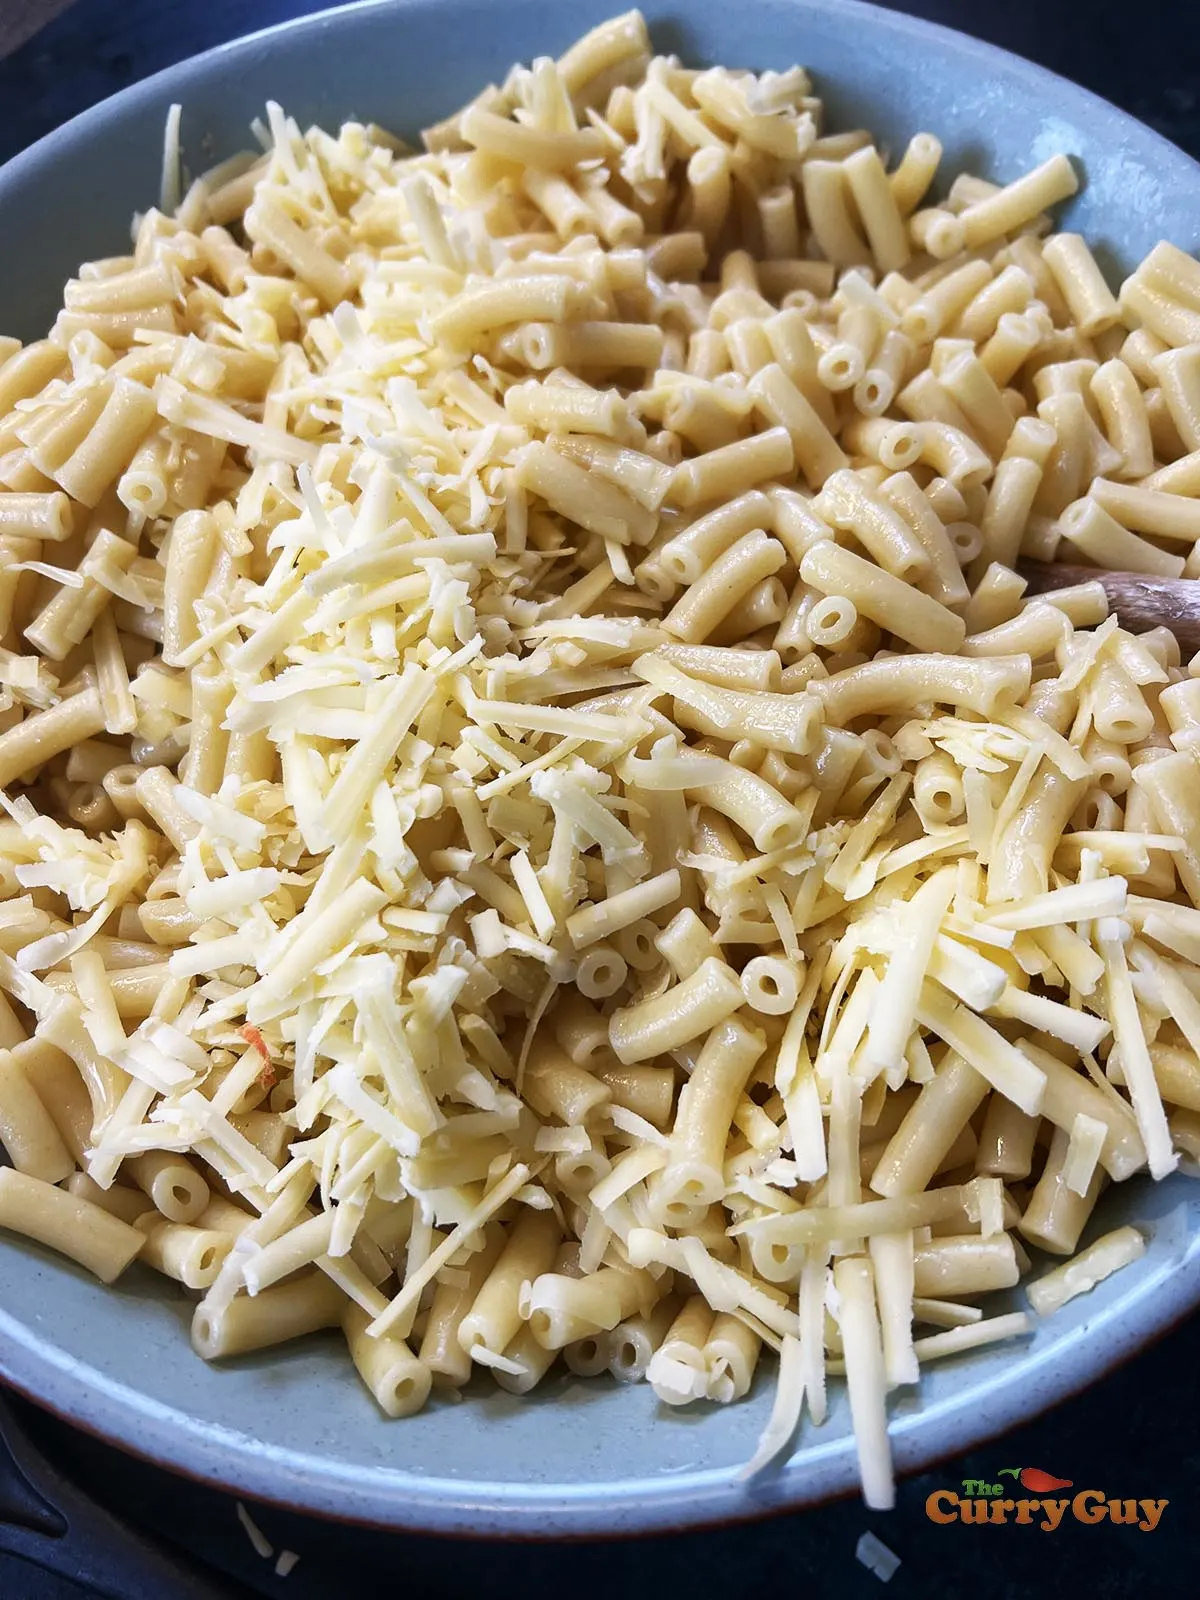 Cheese added to the macaroni